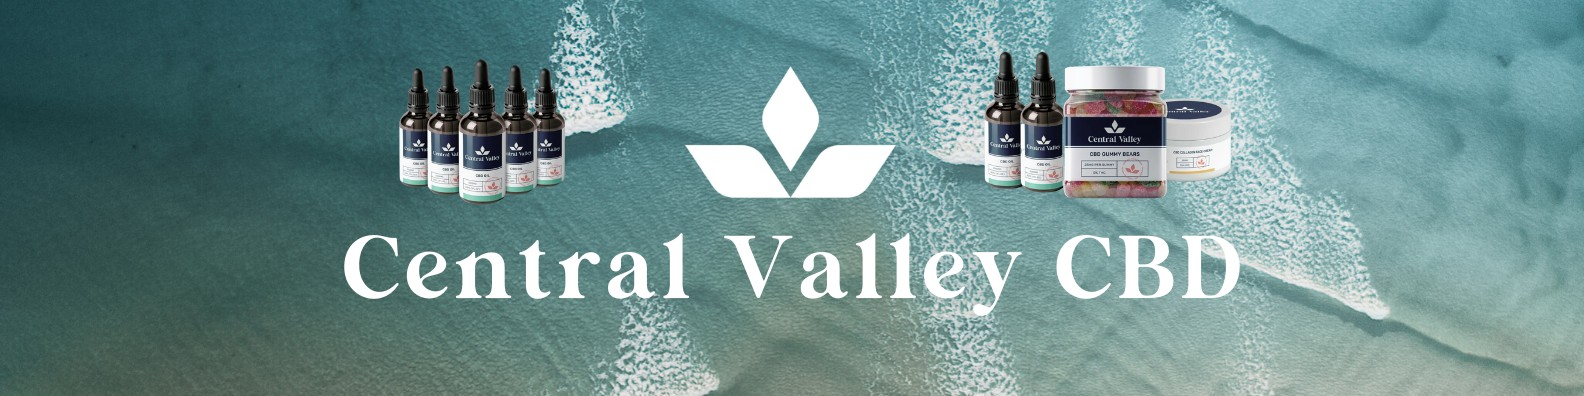 Access exclusive deals, coupons, offers and cashback on Discover the Benefits of Central Valley CBD through OODLZ courtesy of Central Valley CBD.